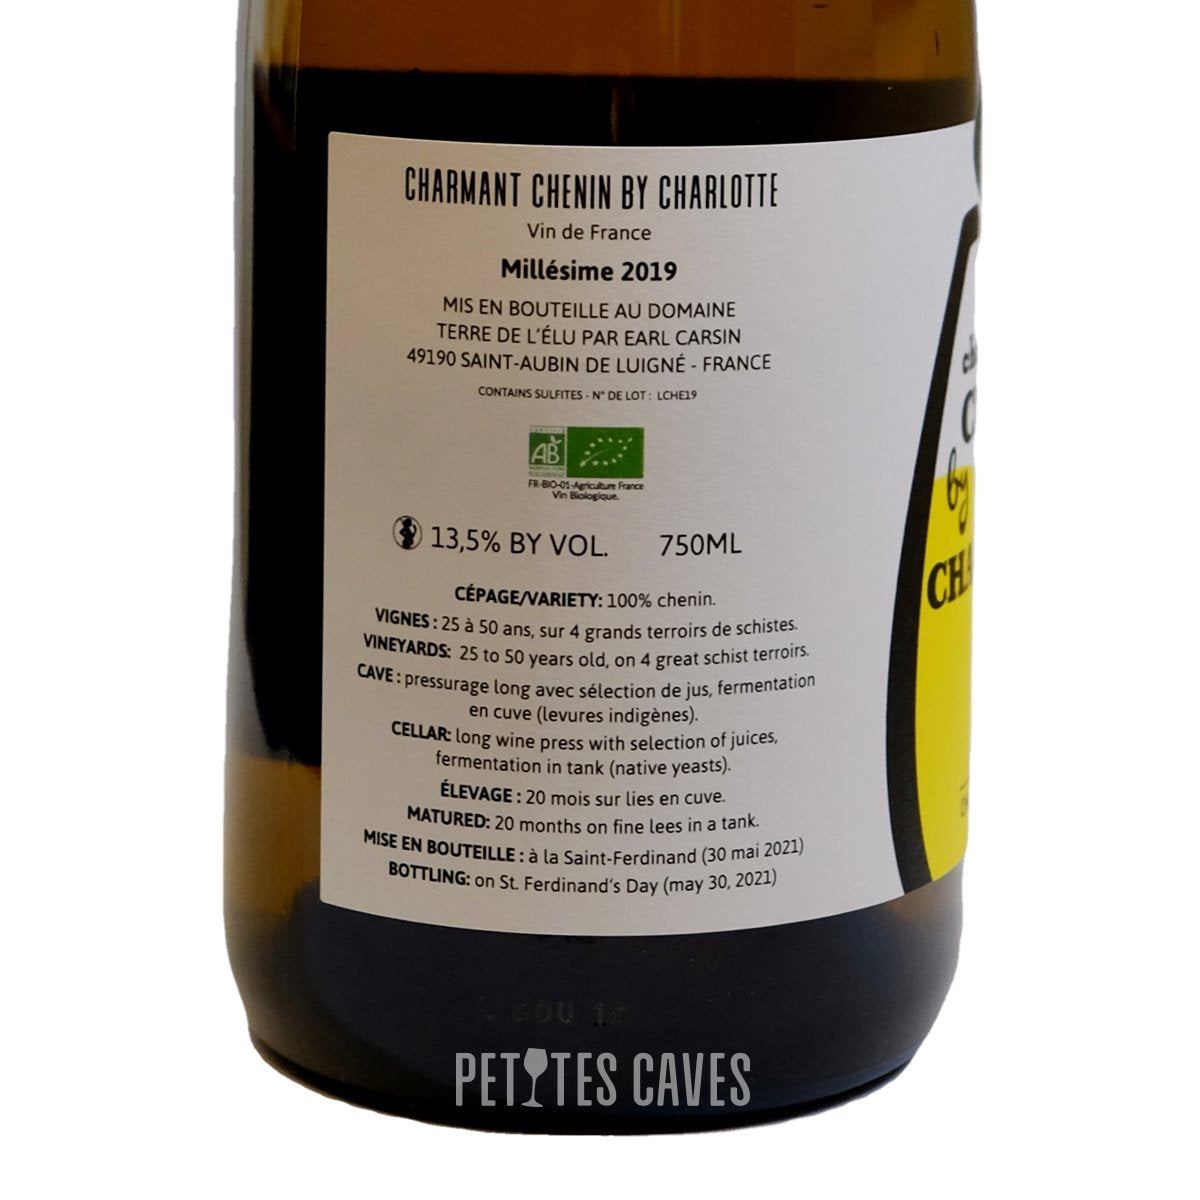 Charmant Chenin by Charlotte 2019 - Vin de France - Winery Terre de l'Elu (Charlotte and Thomas Carsin), an exclusive wine with and for Petites Caves ! Left label